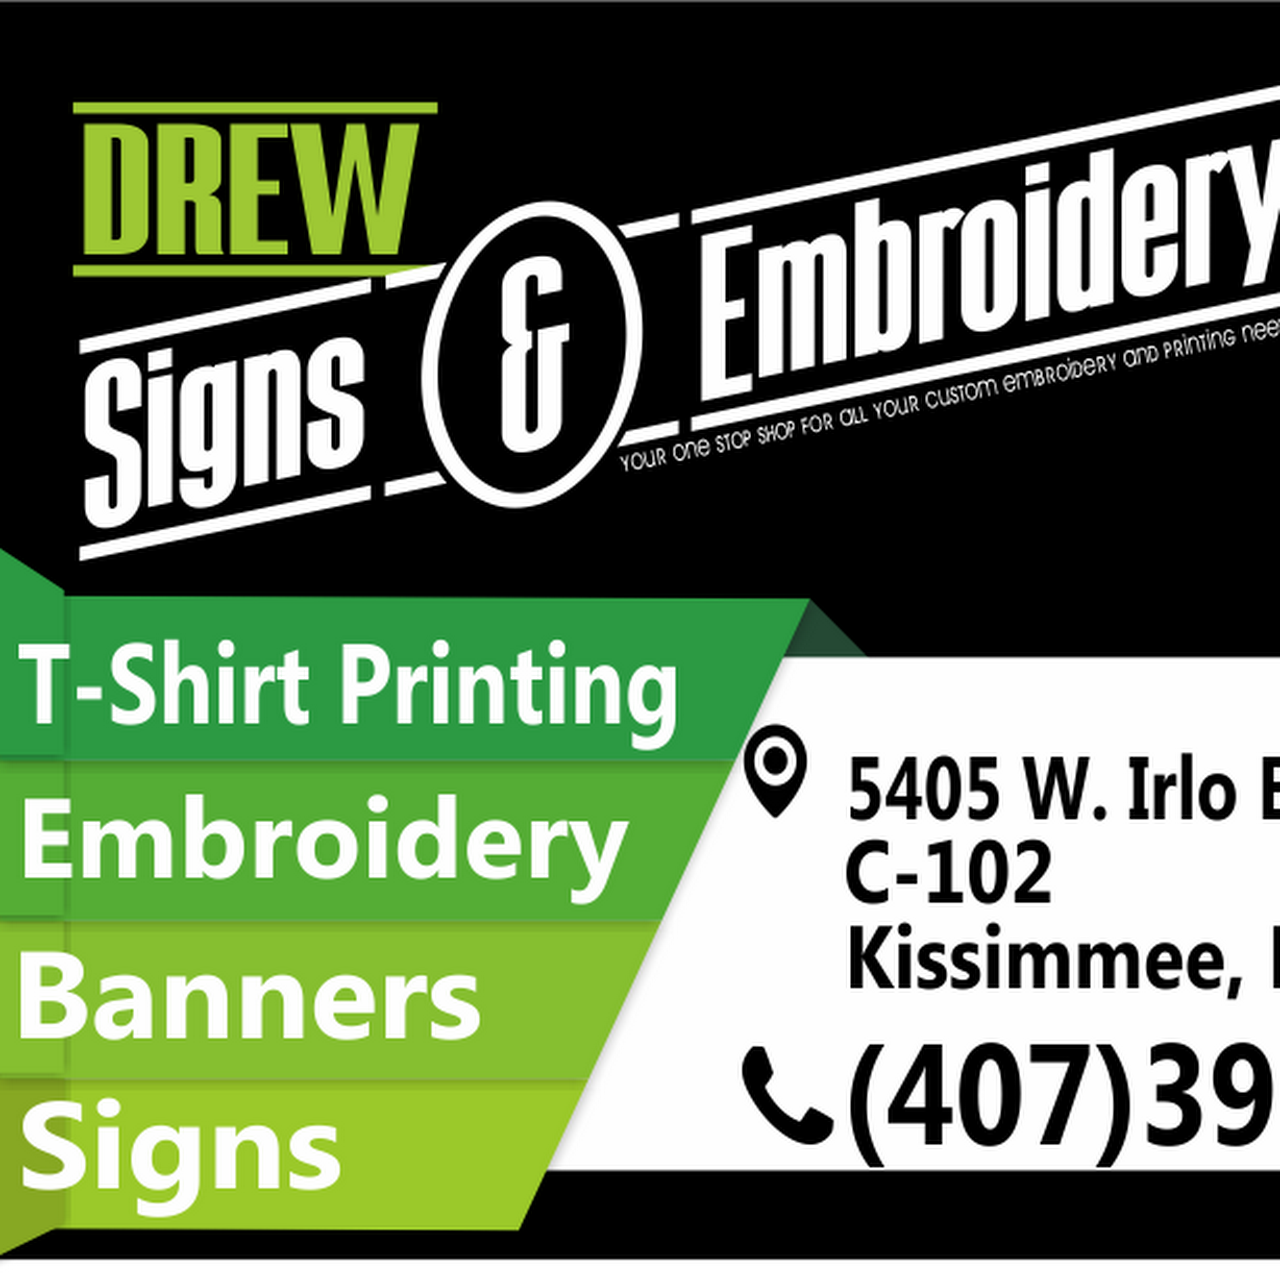 Custom Signs & Embroidery Inc - Graphic Designer in Kissimmee